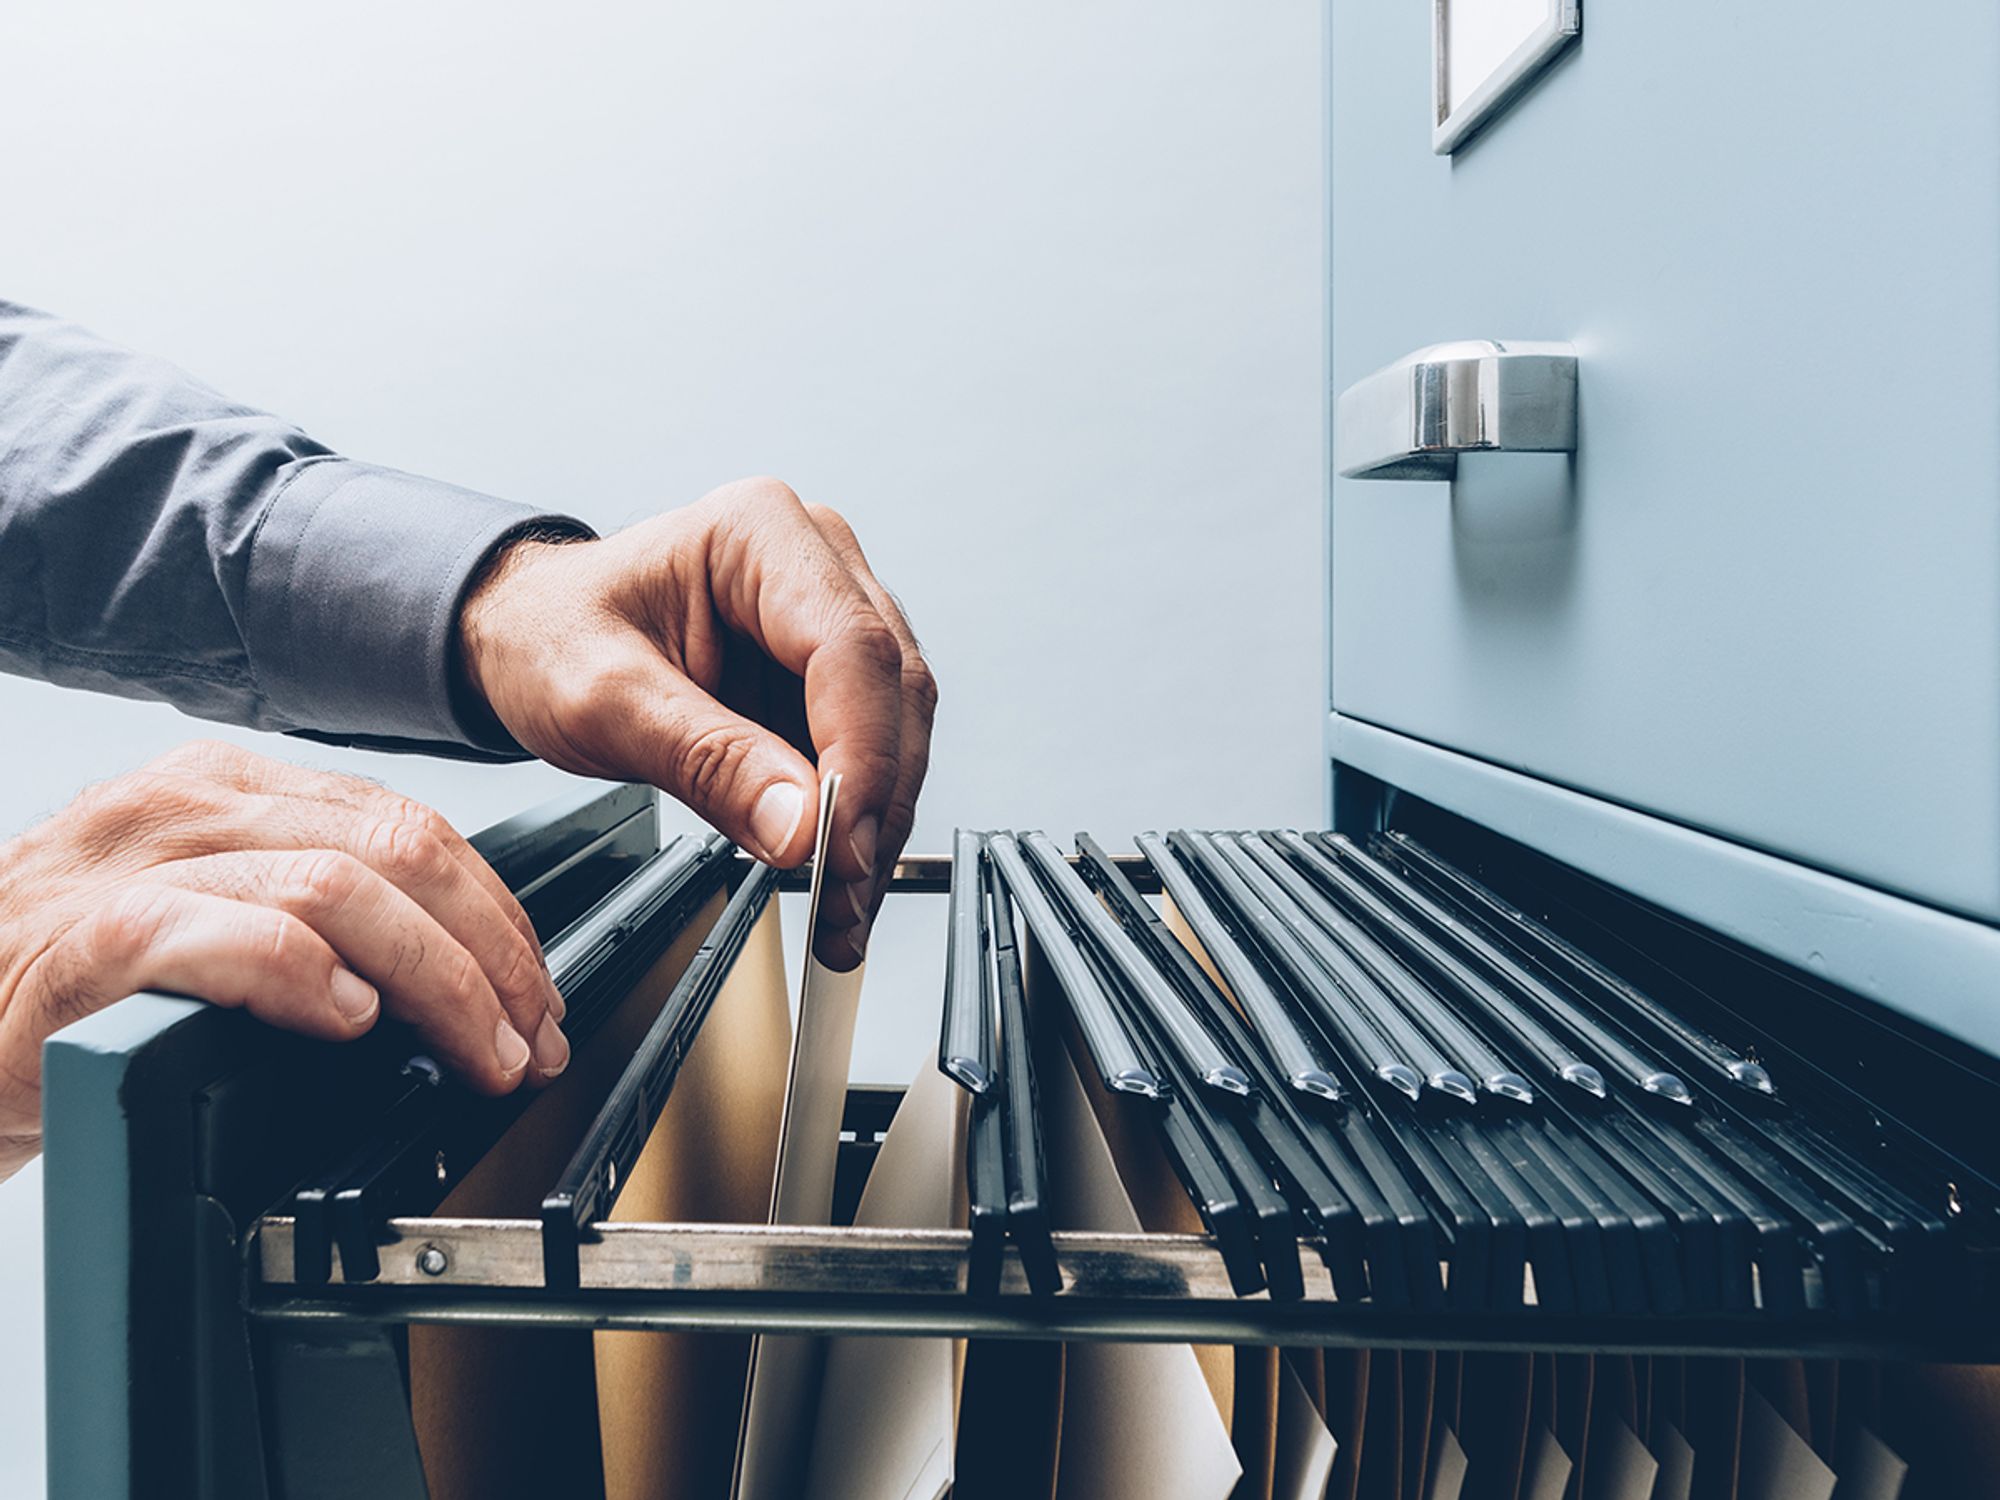 How should an employer keep records for multiple establishments?